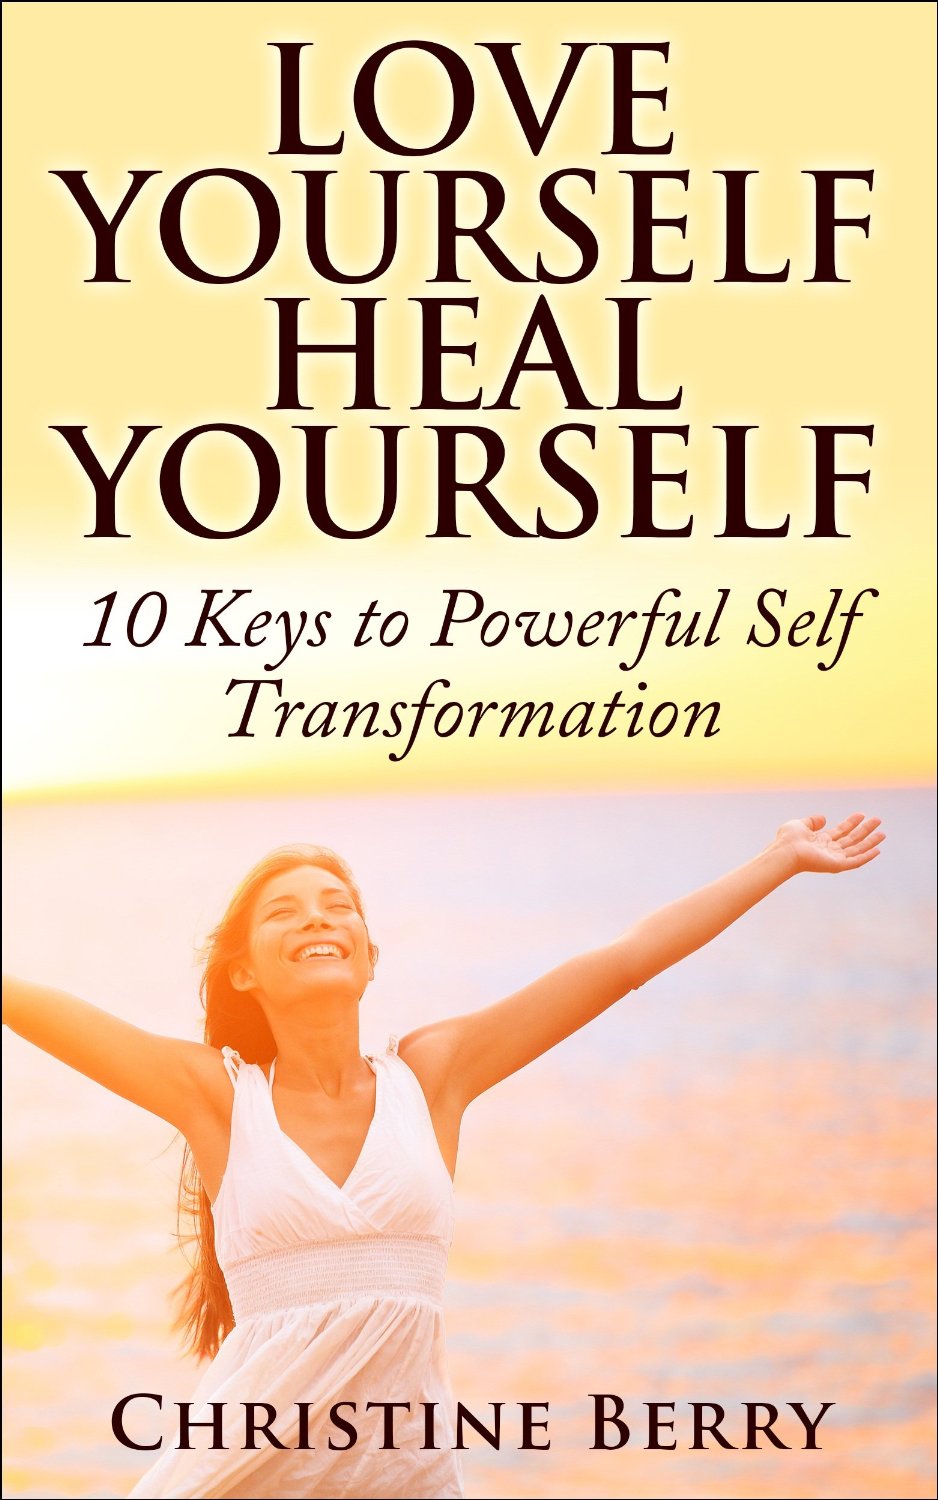 Love Yourself, Heal Yourself: 10 Keys to Powerful Self Transformation by Christine Berry